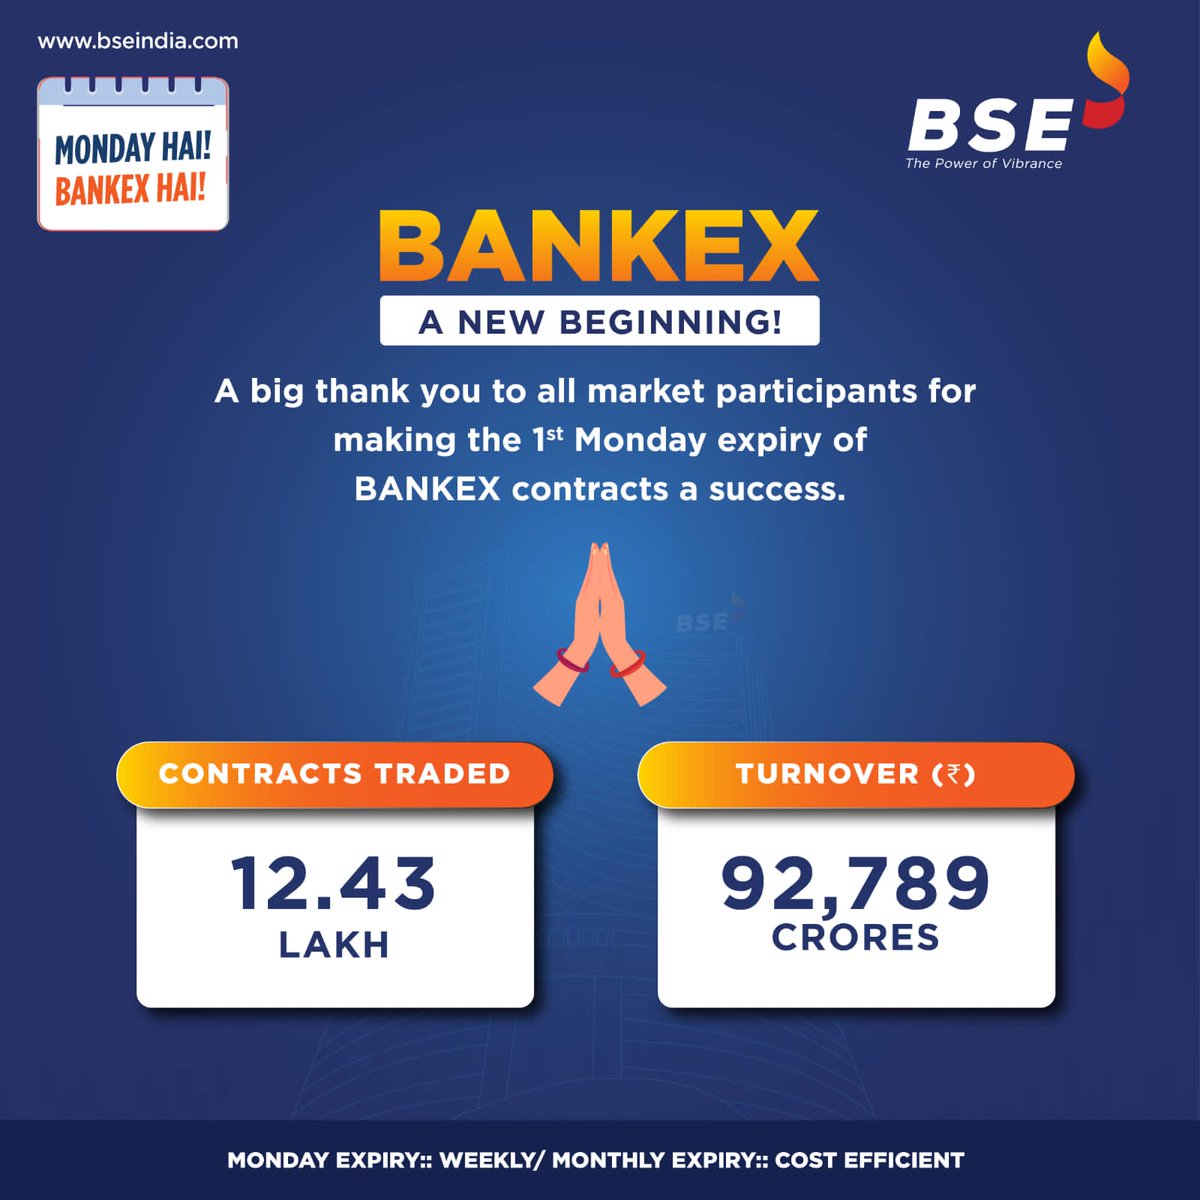 A Big Thank You to all market participants 🙏🏻 #Bankex #OptionsTrading #futurestrading #BSE #BSEIndia